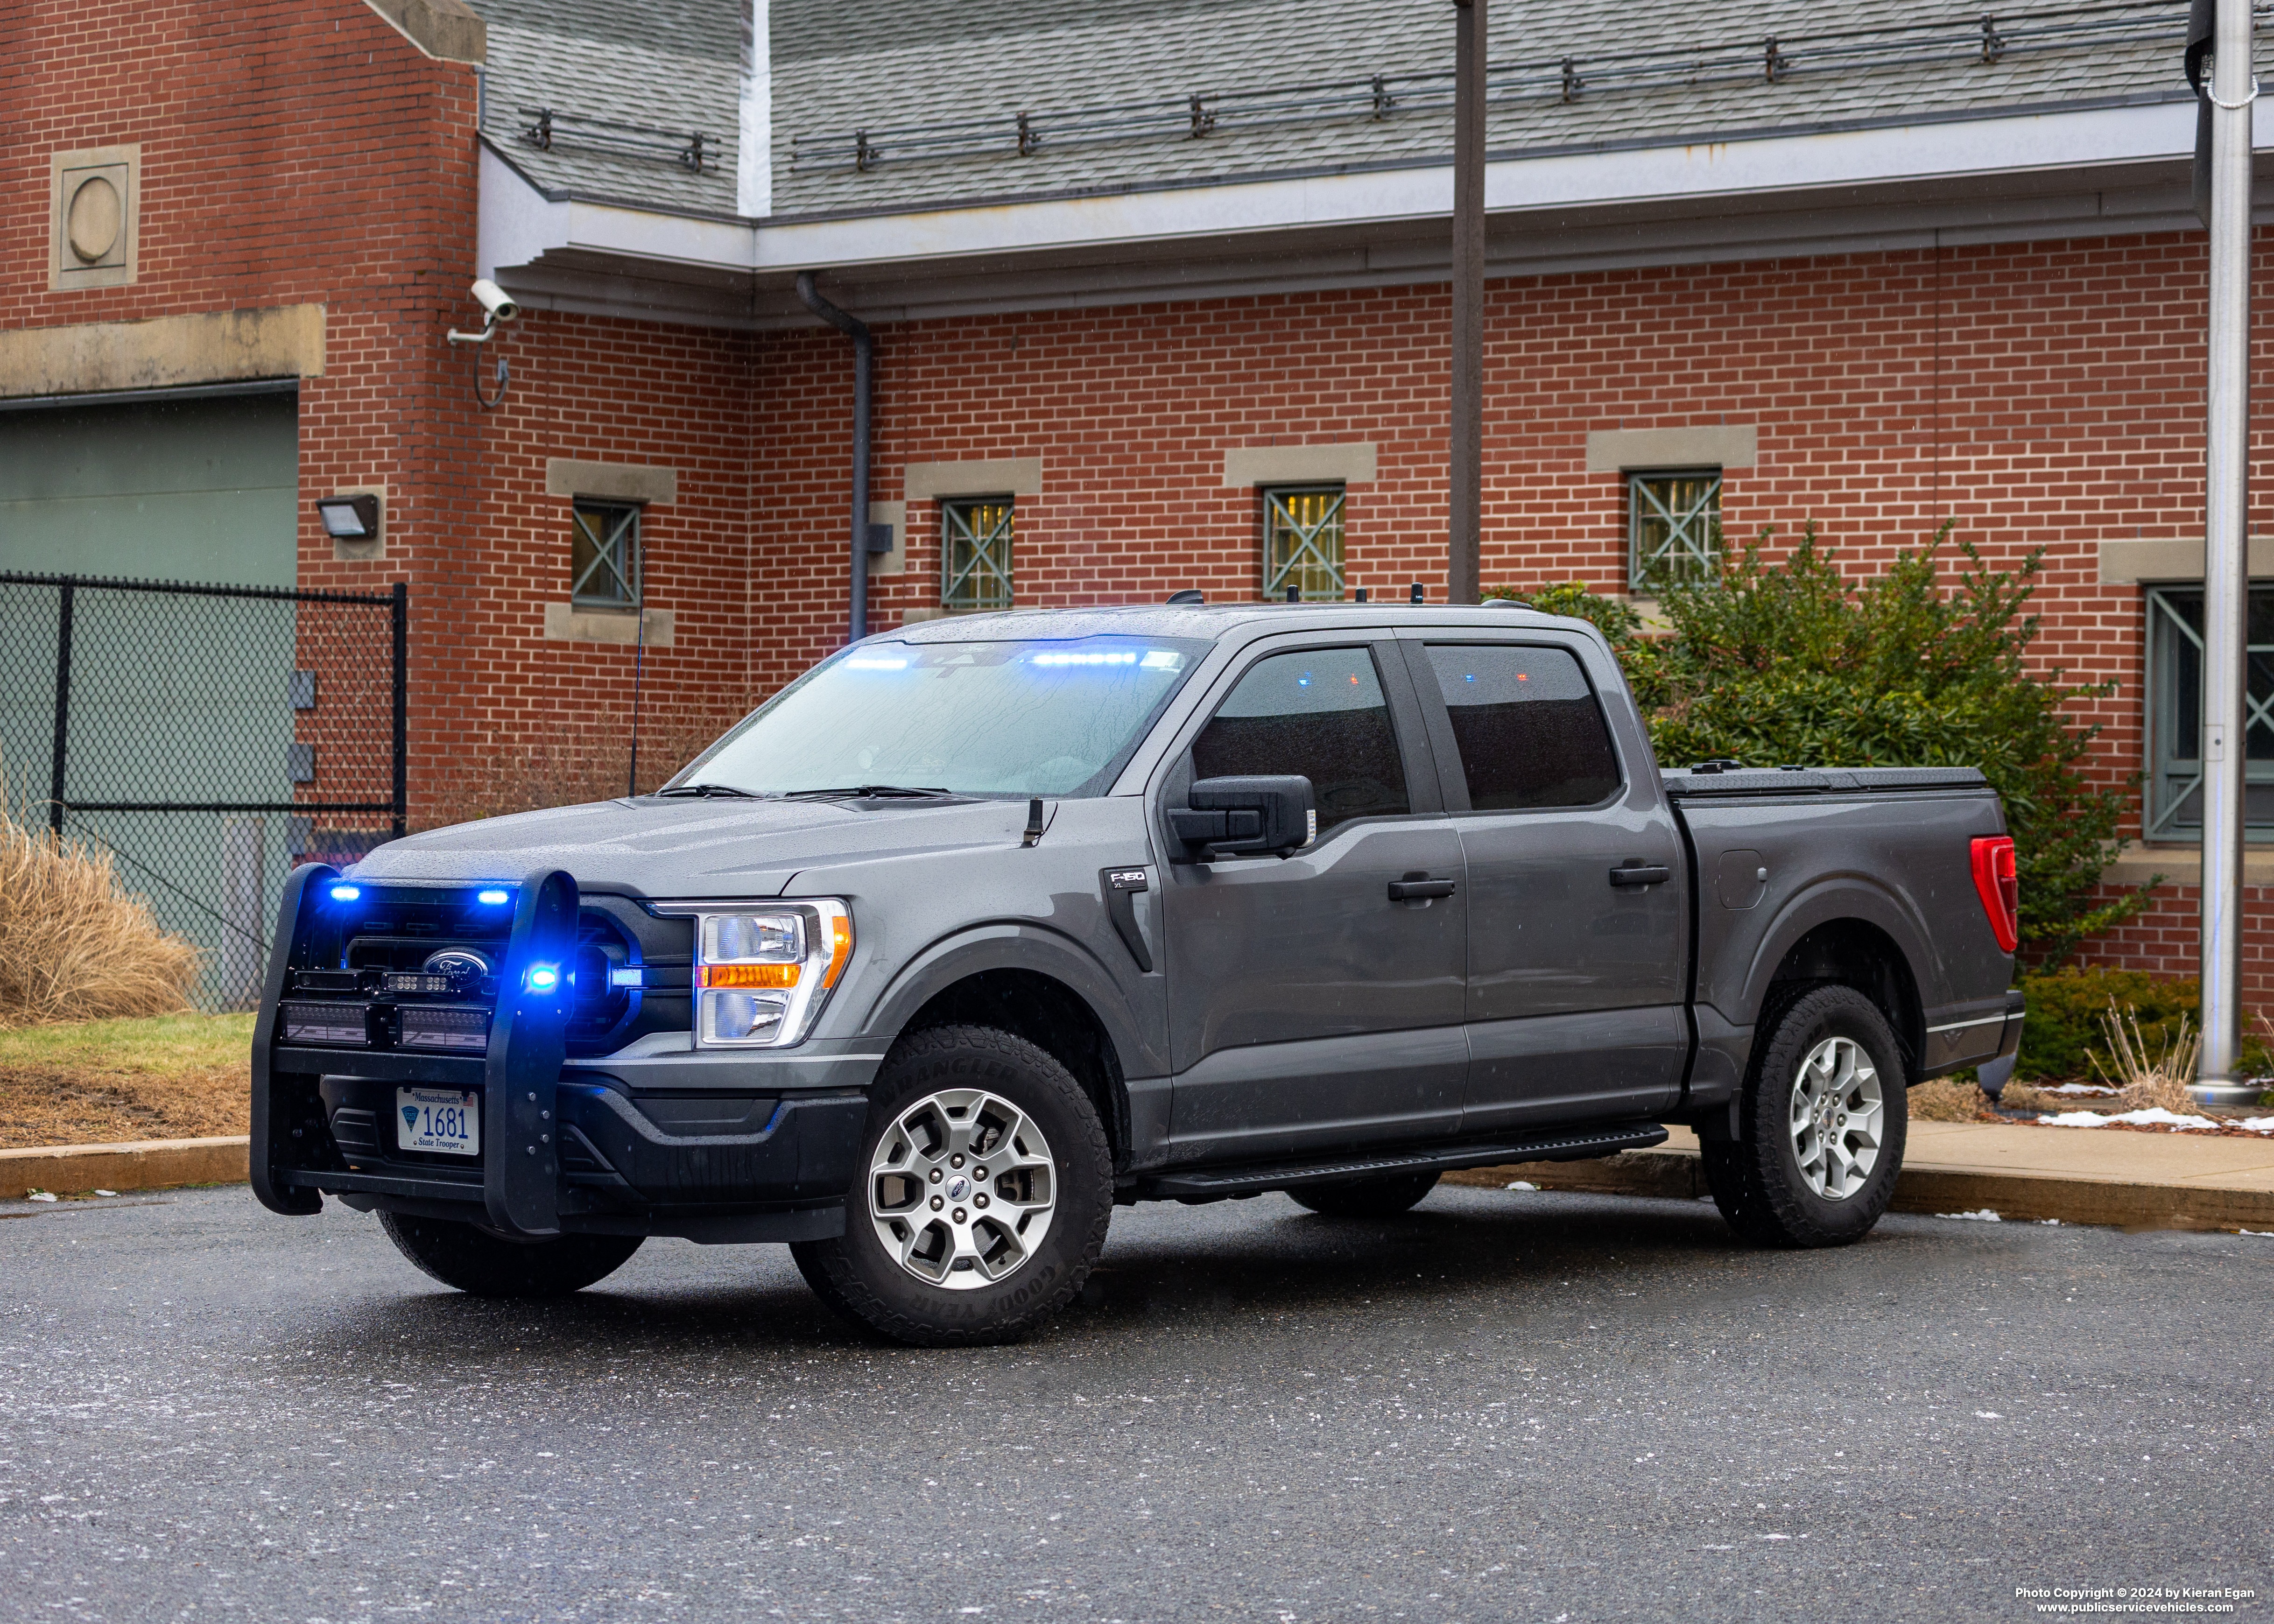 A photo  of Massachusetts State Police
            Cruiser 1681T, a 2022 Ford F-150 Police Responder             taken by Kieran Egan